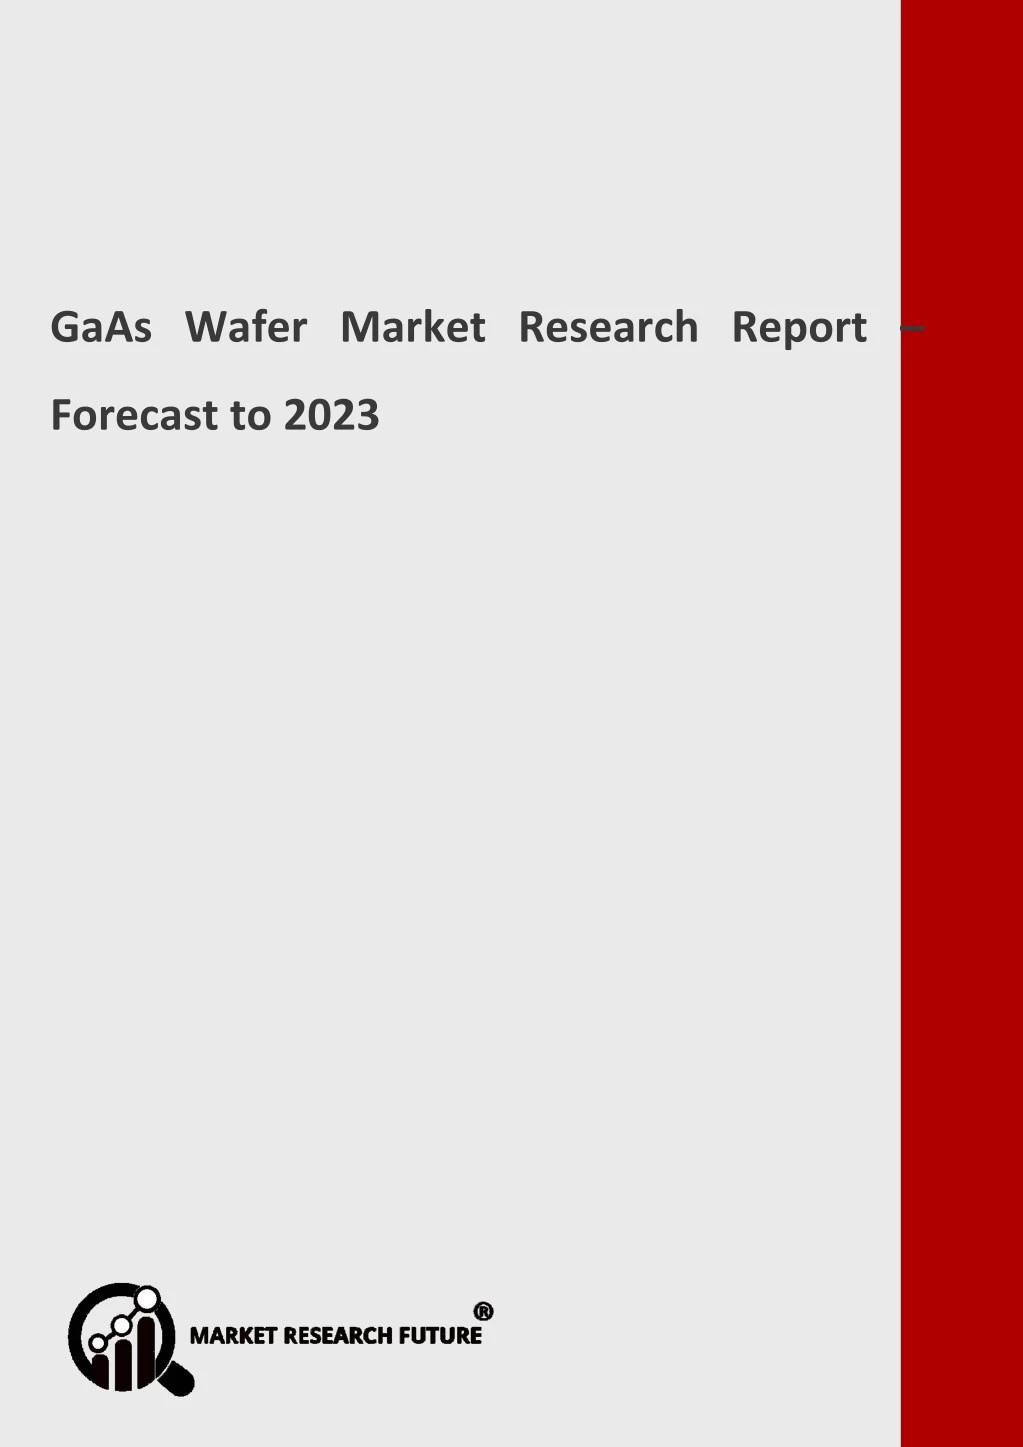 gaas wafer market research report forecast to 2023